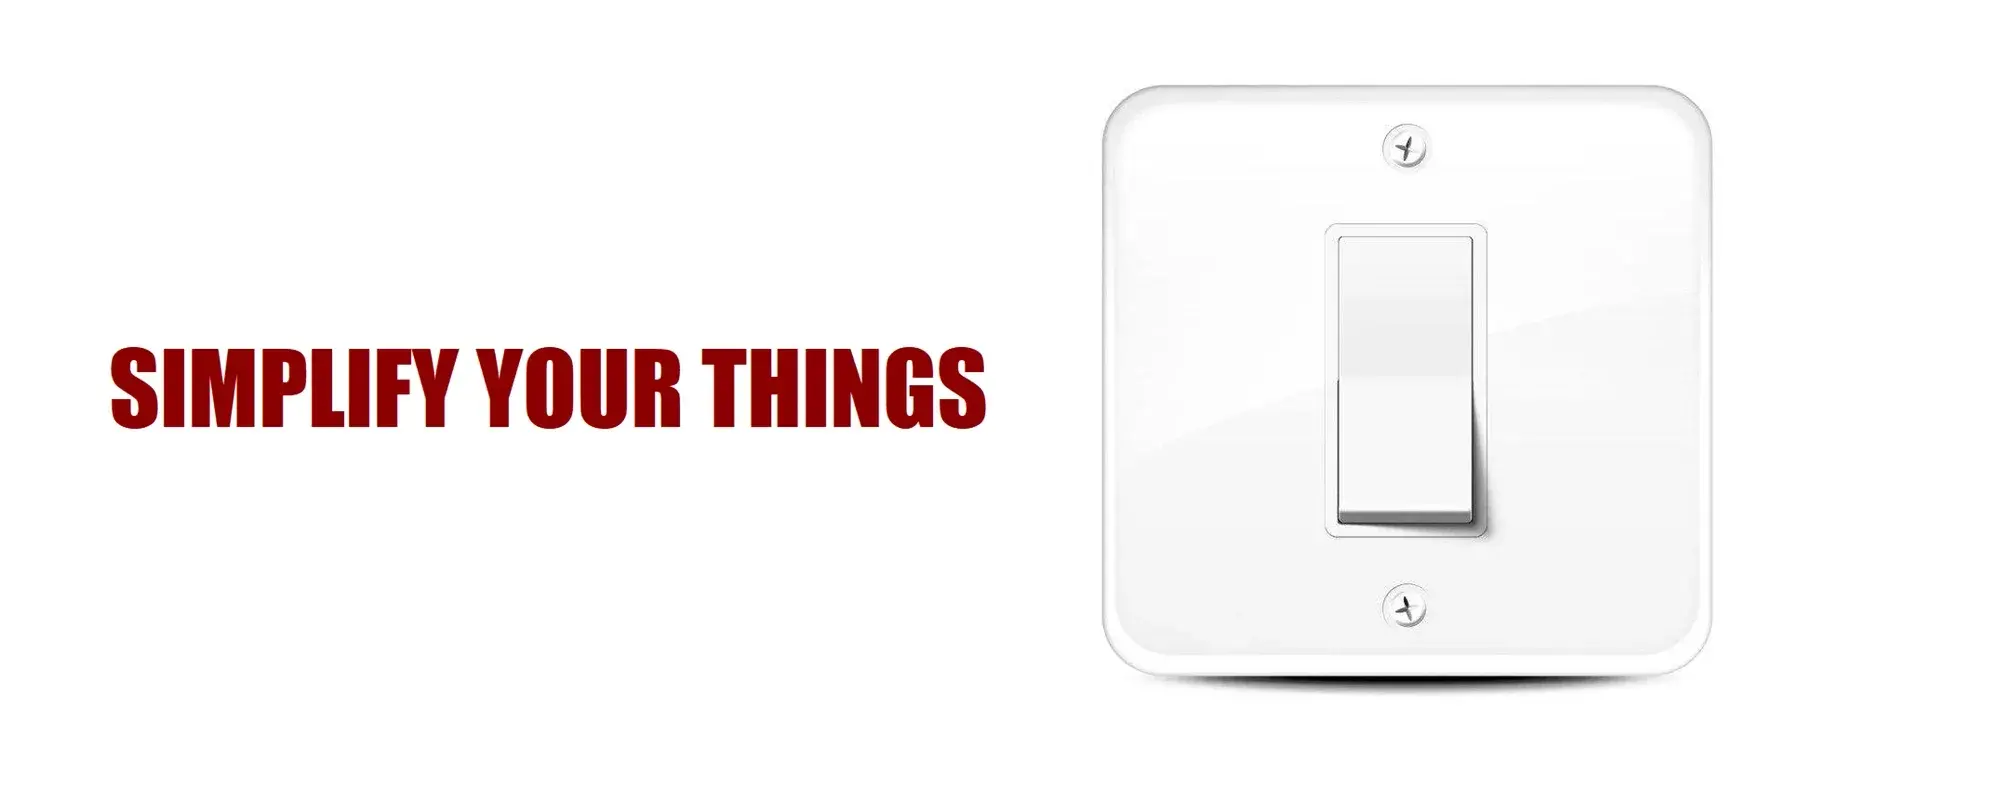 BANNER 5 - SIMPLIFY YOUR THINGS